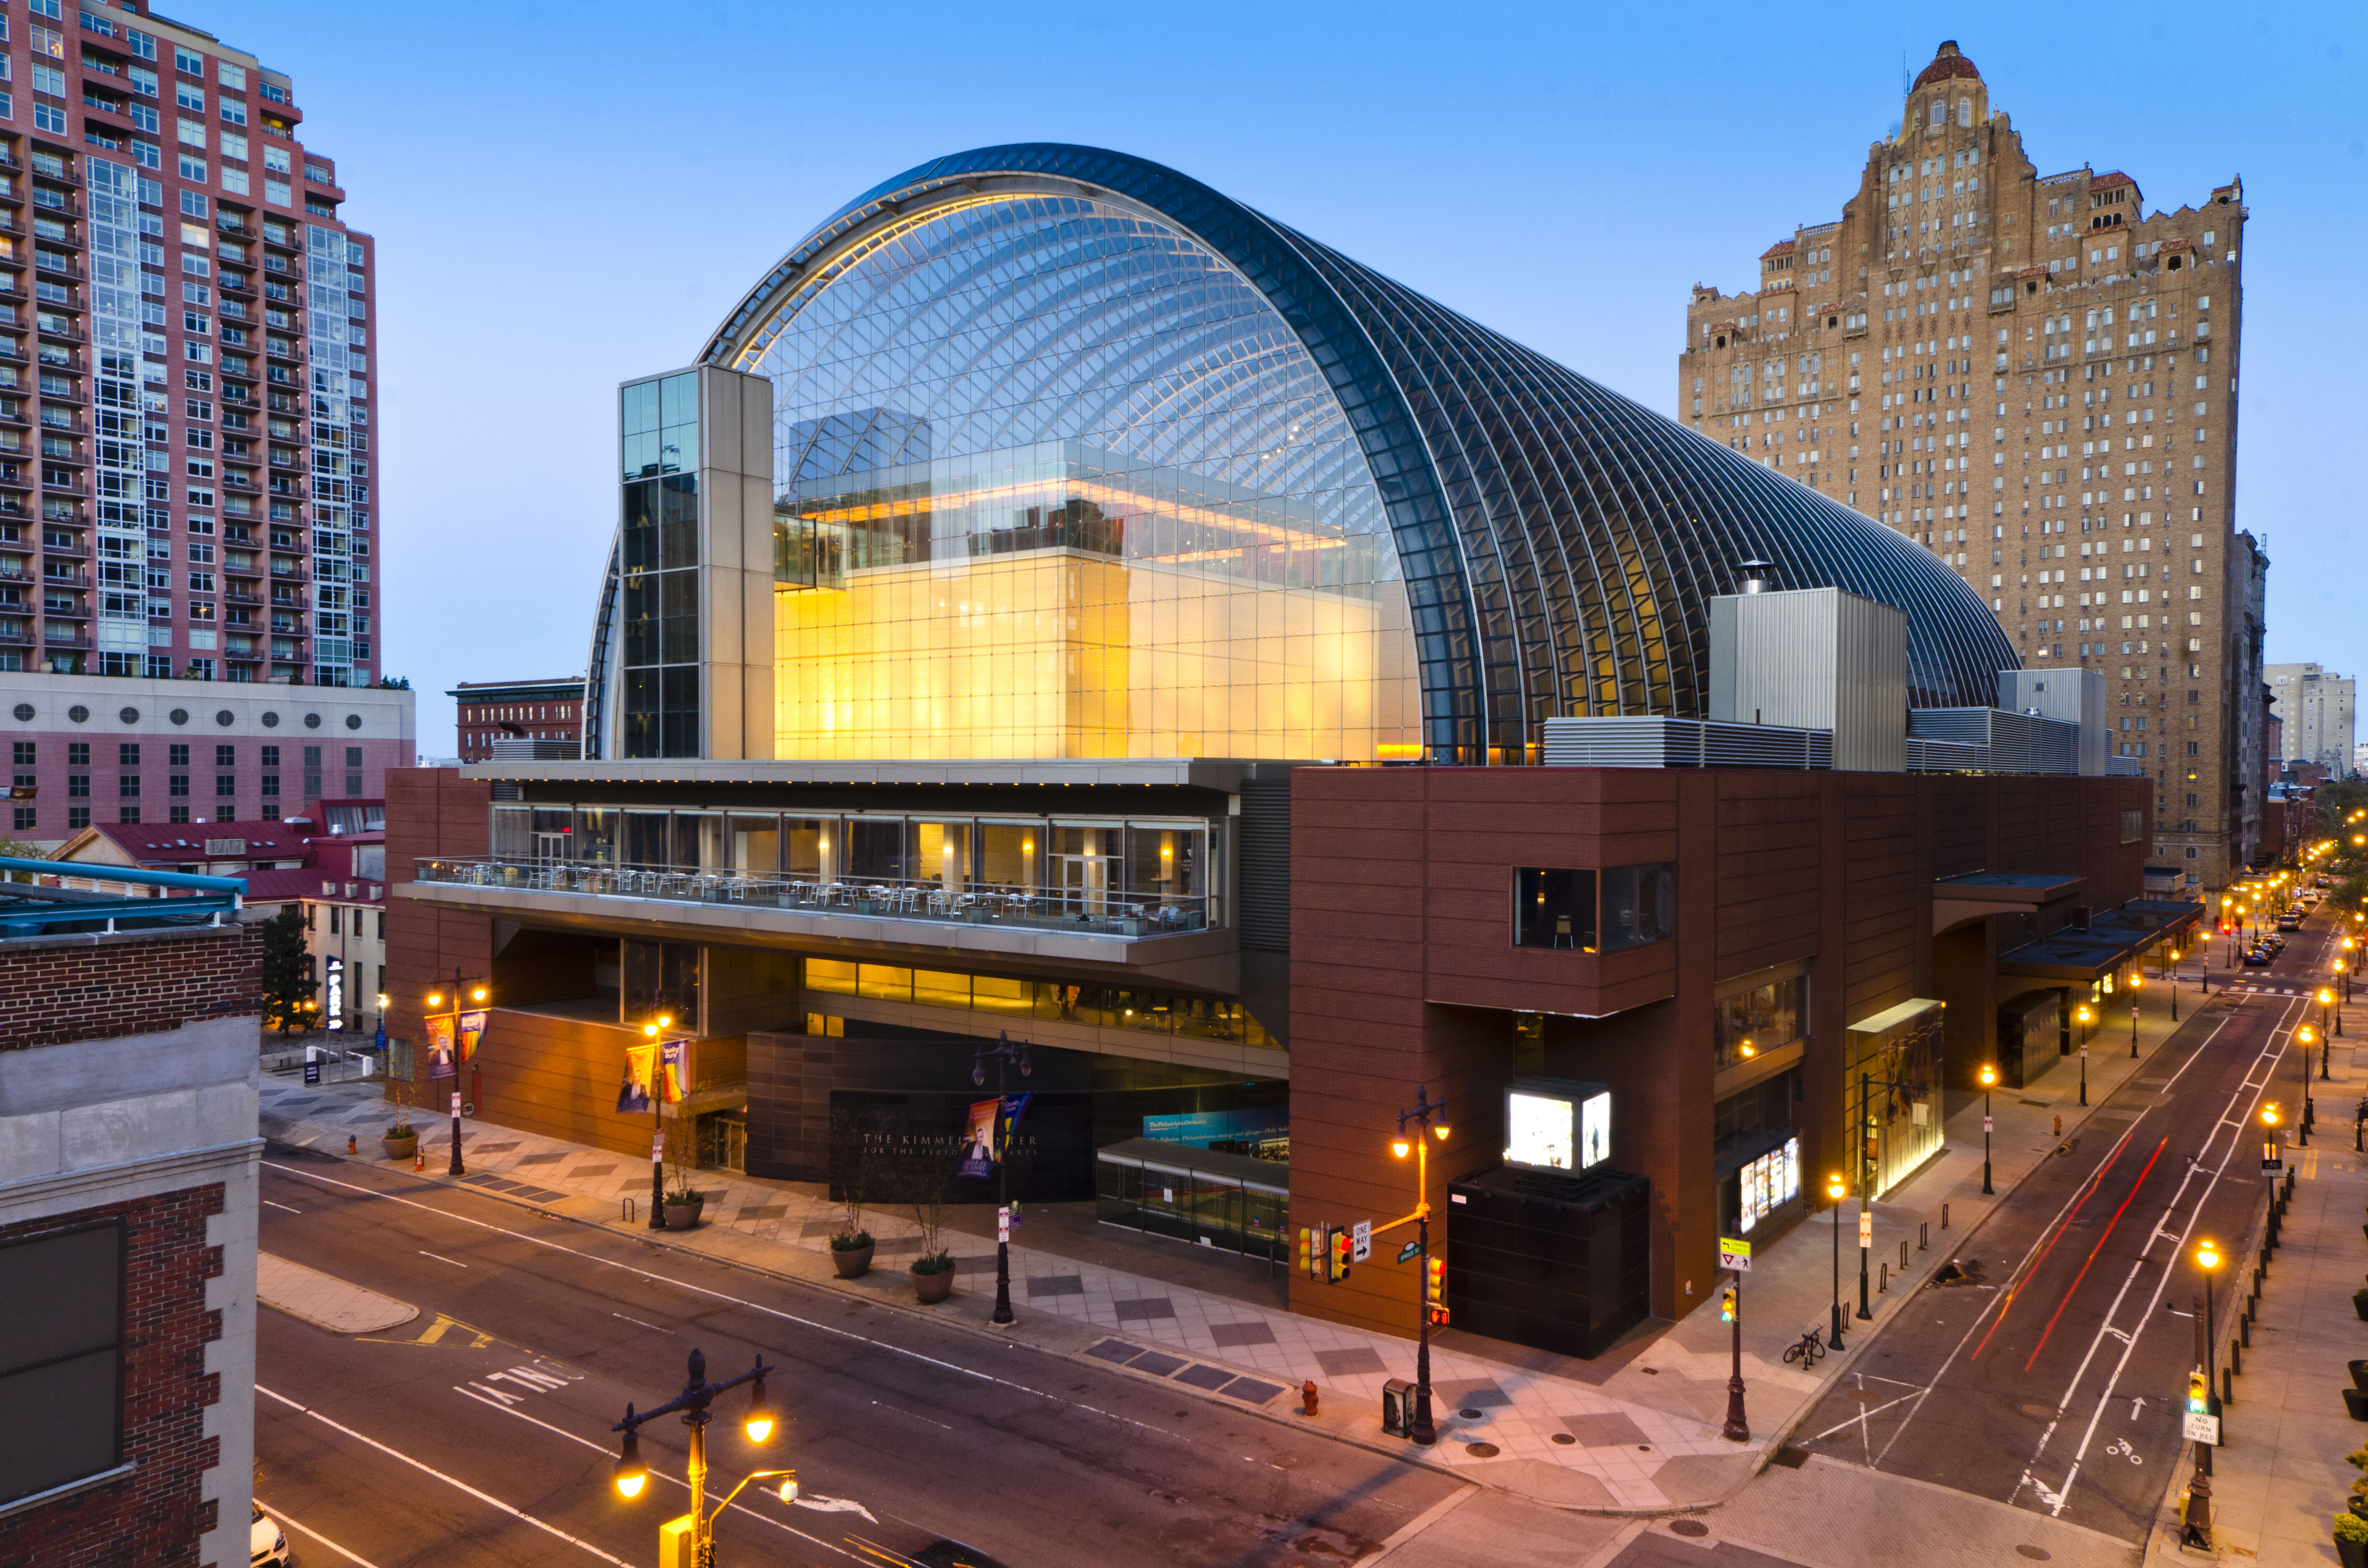 The Kimmel Center for the Performing Arts